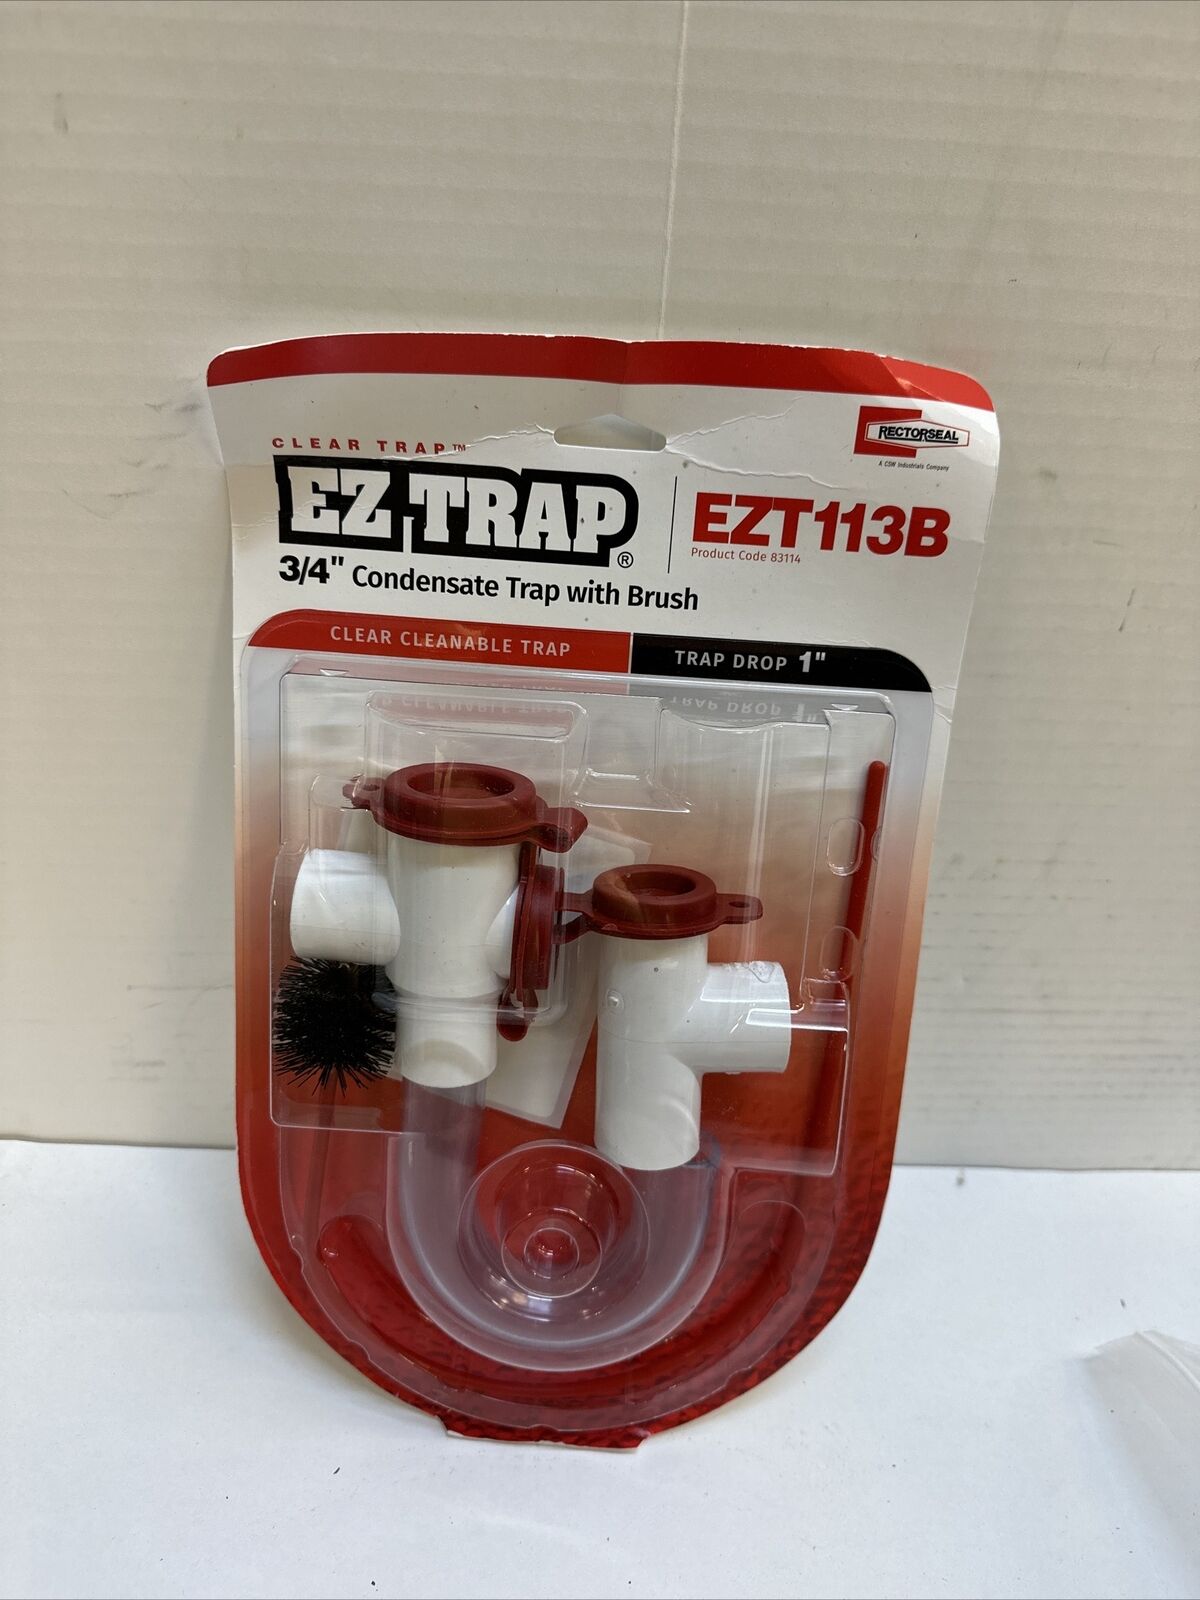 Rectorseal EZT113B Clear 3/4” Condensate Trap Kit with Brush